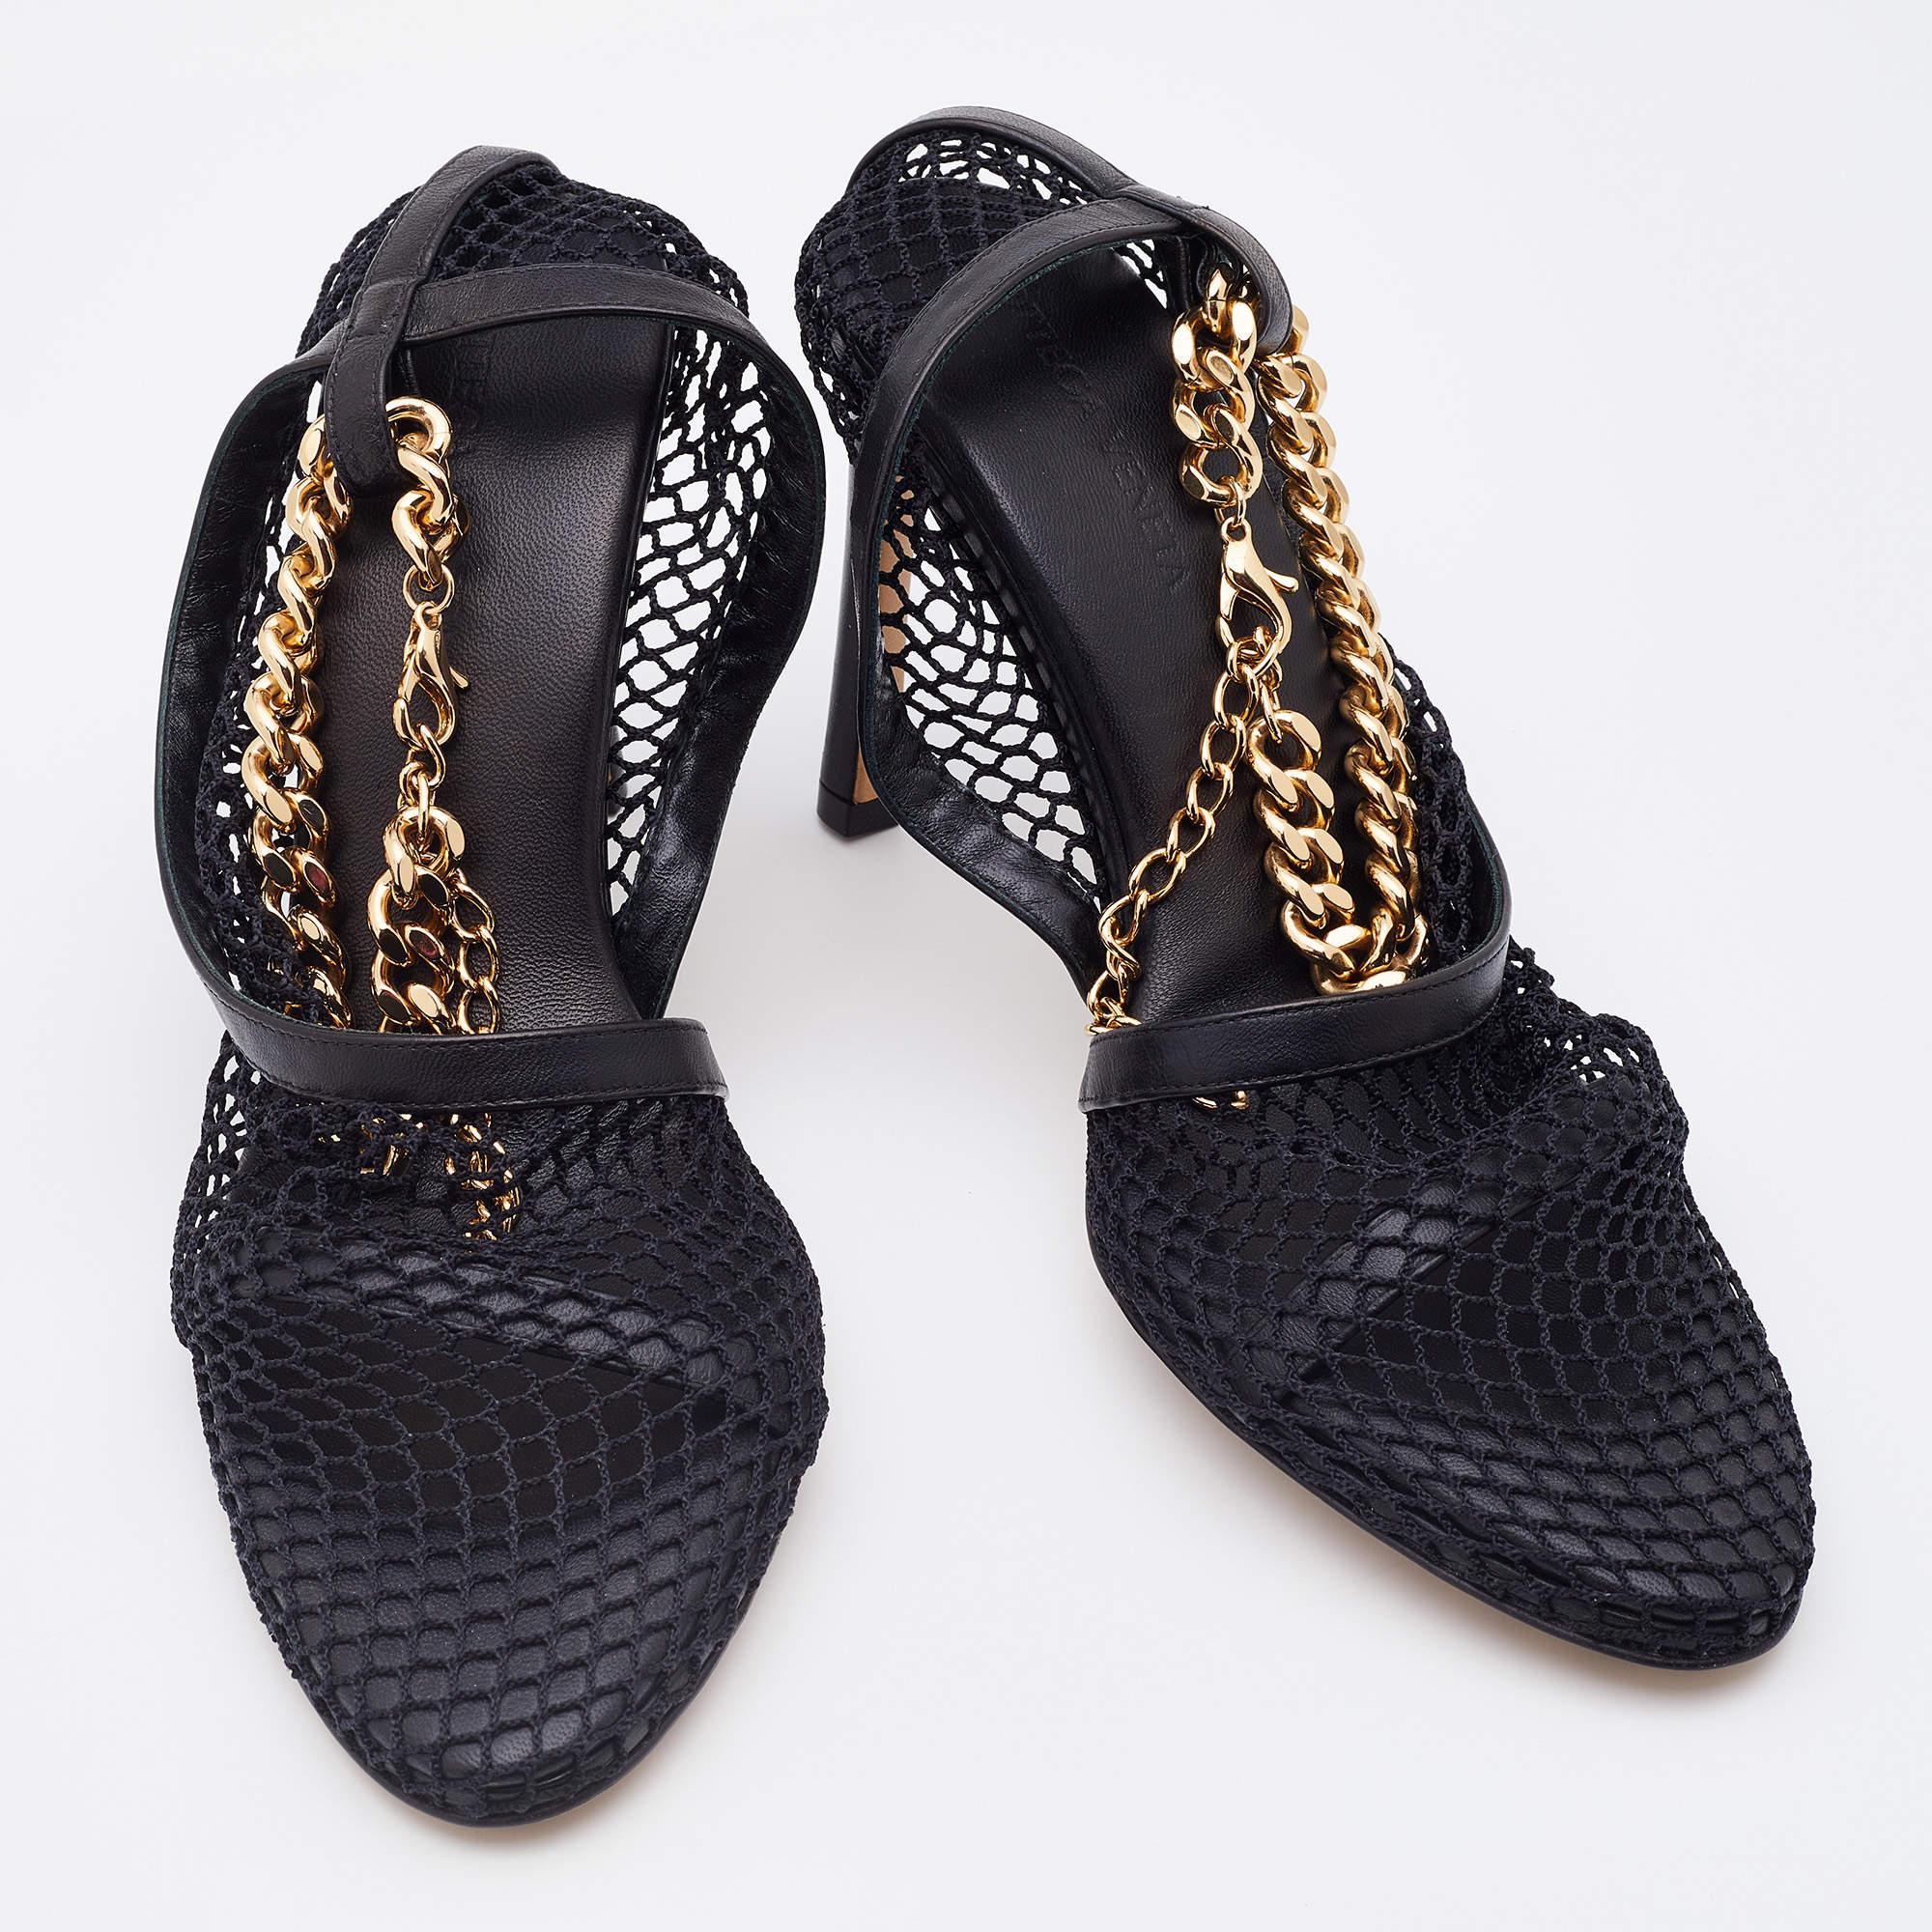 Bottega Veneta brings you this beautifully crafted pair of sandals for a fashionable look. It has an absolutely sophisticated exterior in mesh with a gold-tone chain trim.

Includes: Original Box, Original Dust bag, Info Booklet, Extra Heel Tips